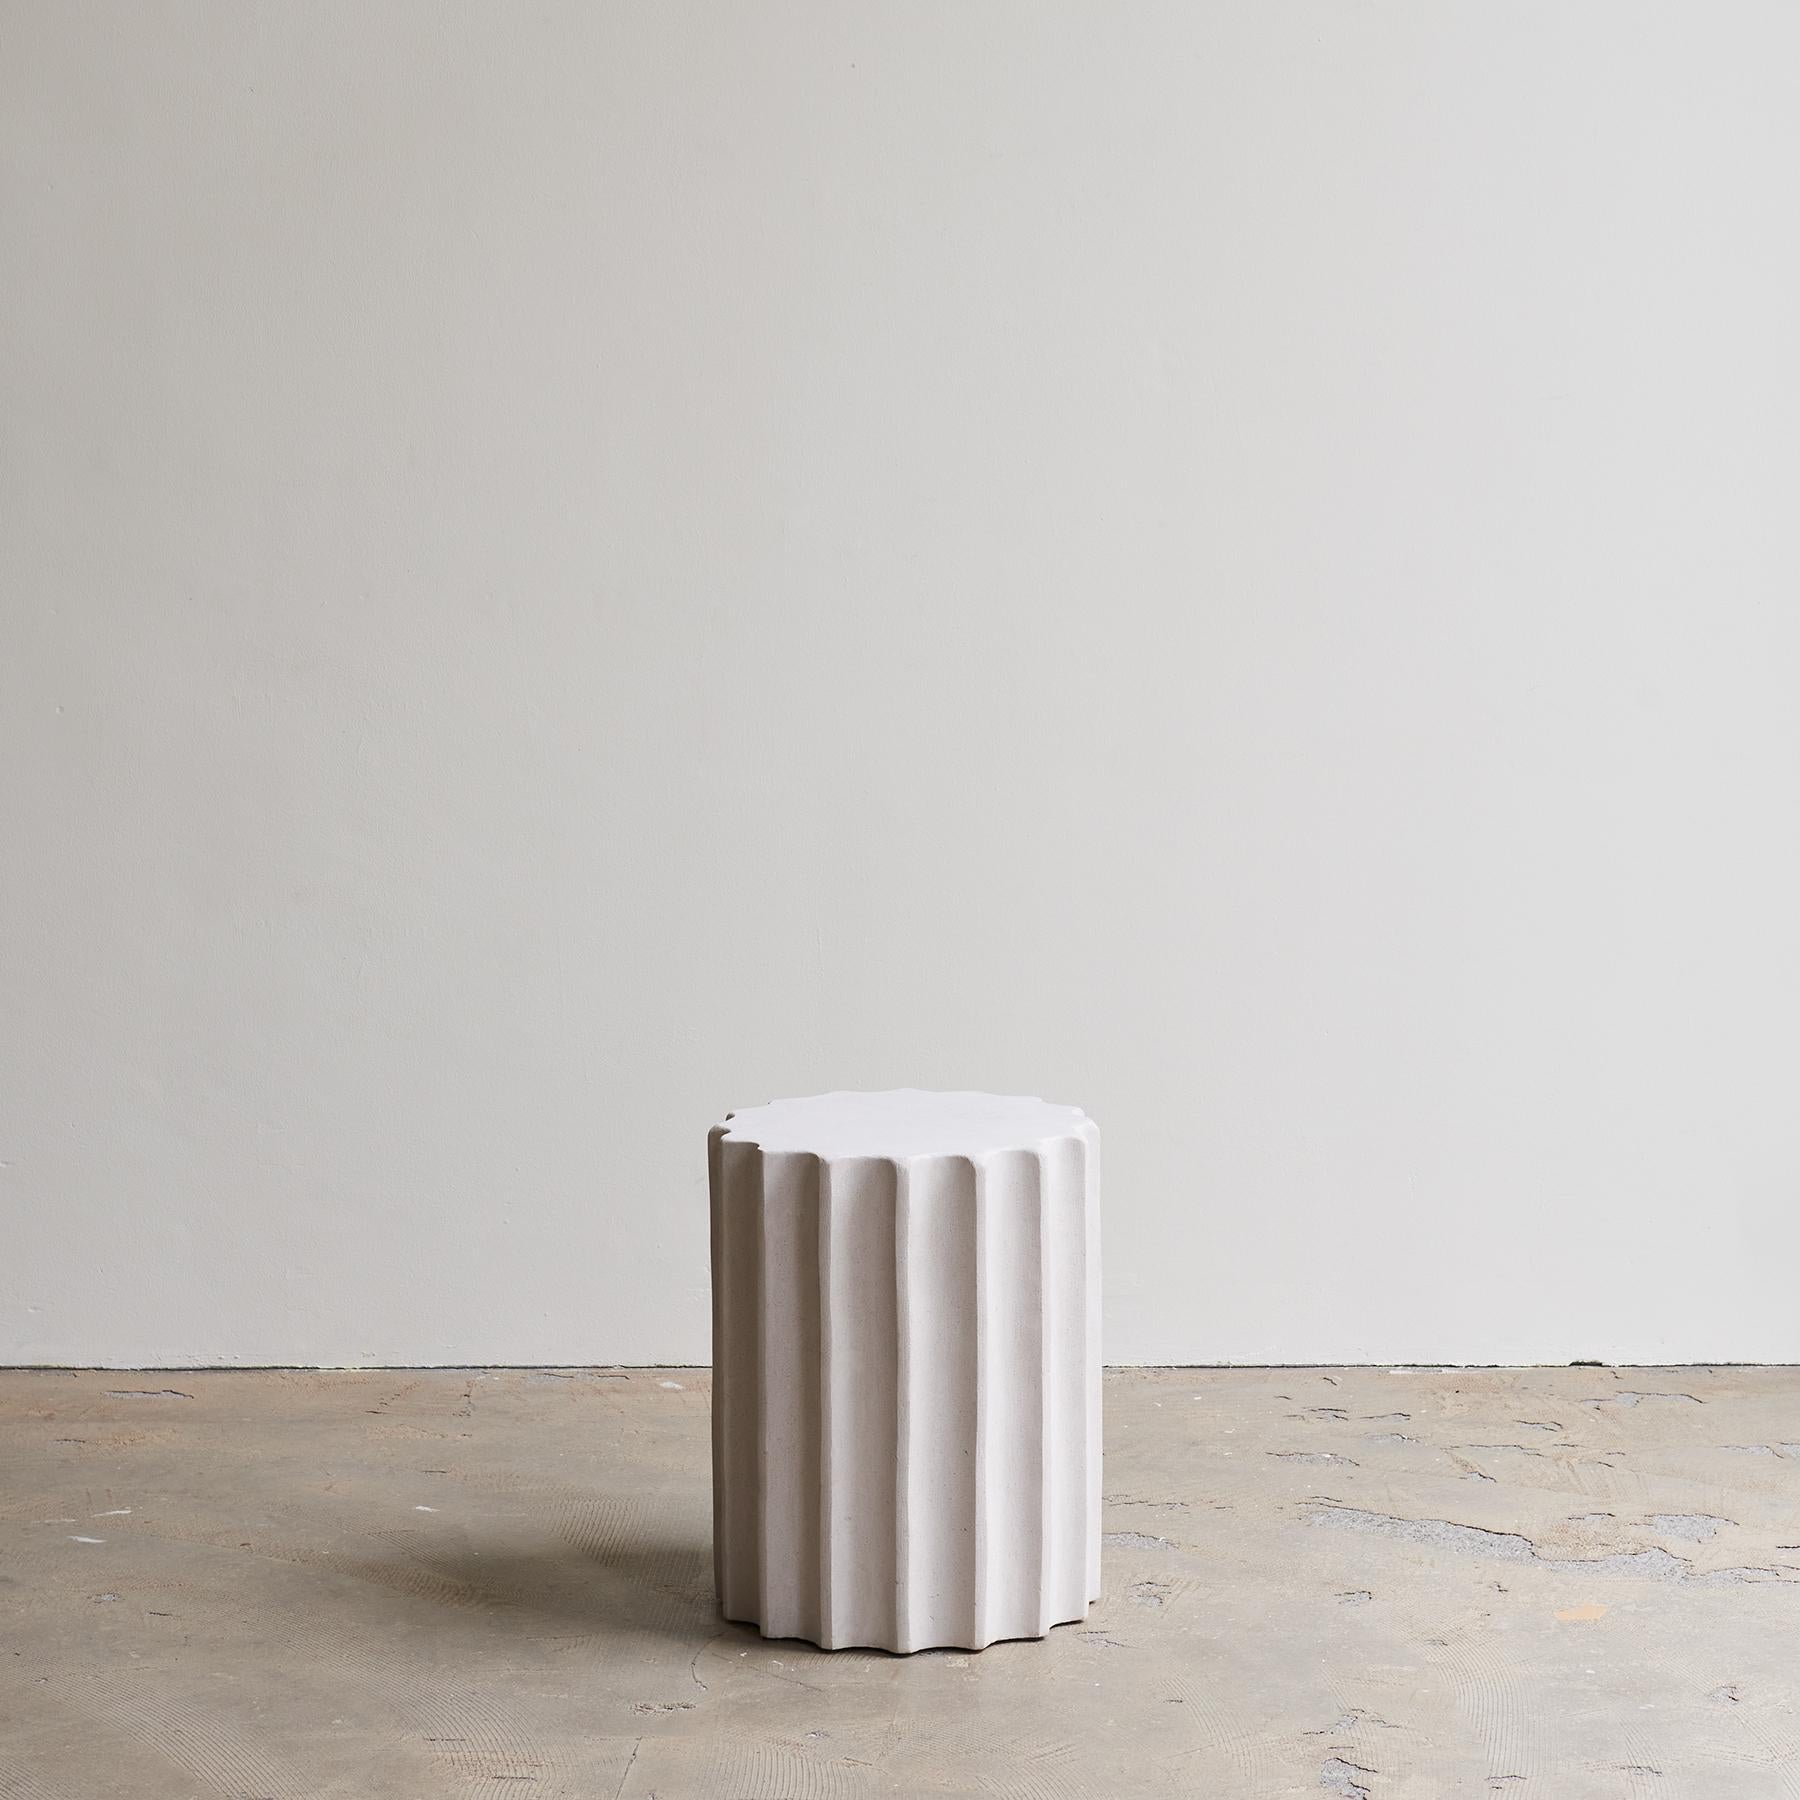 Handmade Column I side table by Atelier Ledure
Dimensions: W 34 x 42 H cm
Materials: Clay


Reimagining the past and reshaping our future
The Column I series brings back architecture to its basic principles; questioning predetermined roles and